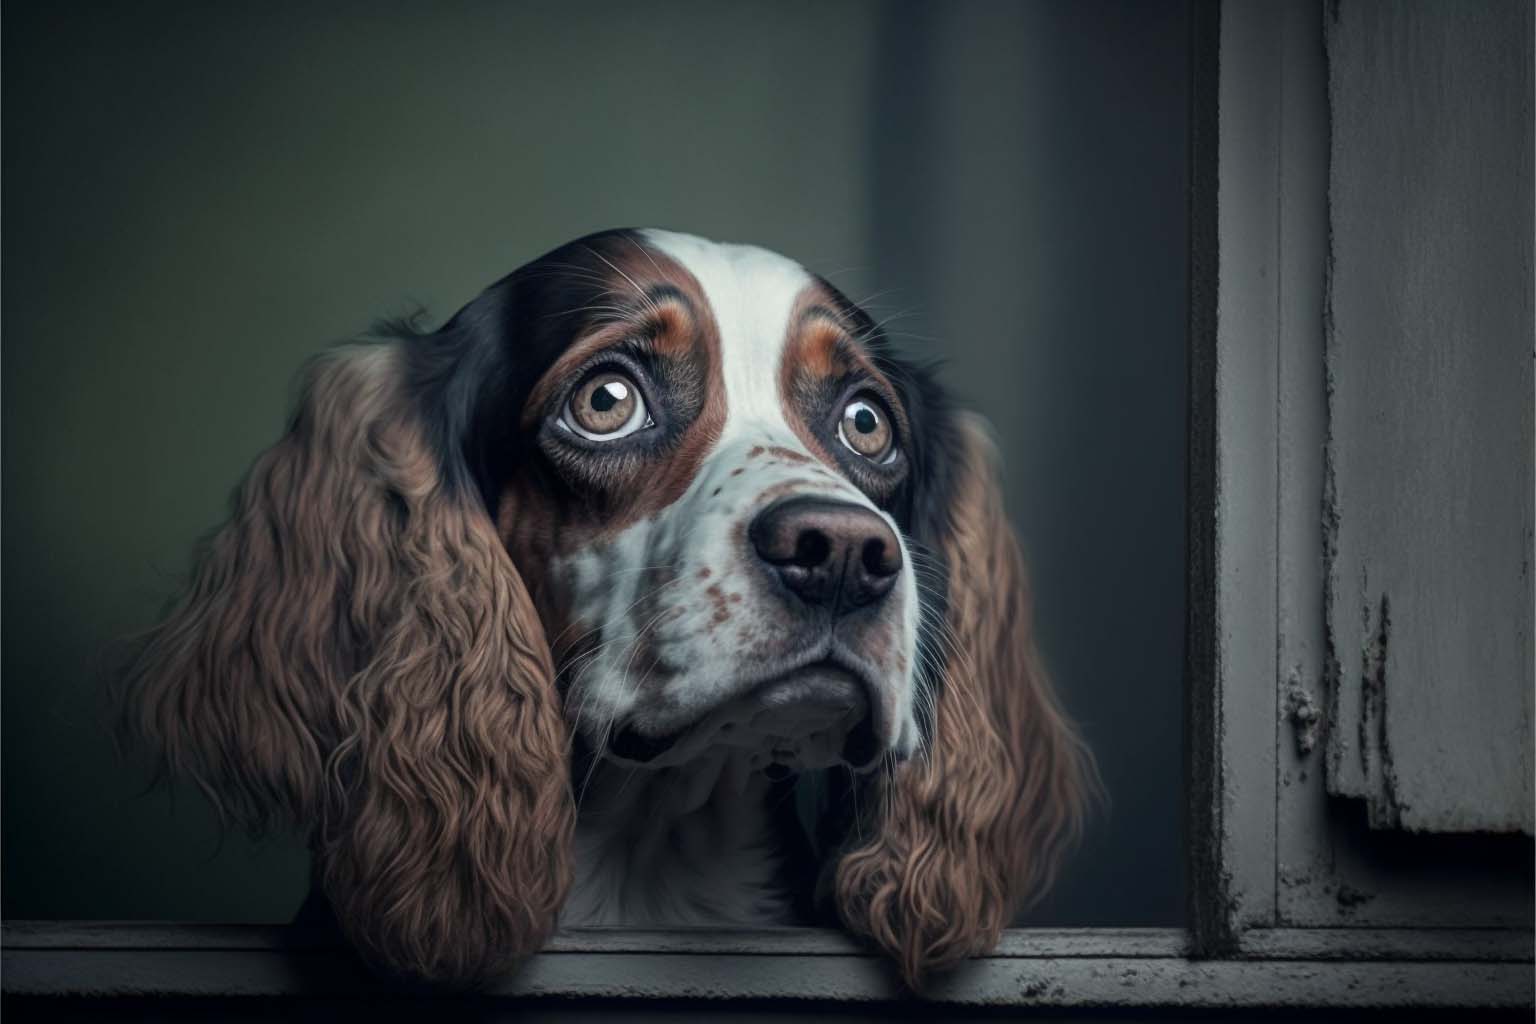 How anxiety relates to dog aggression and why we need to treat it